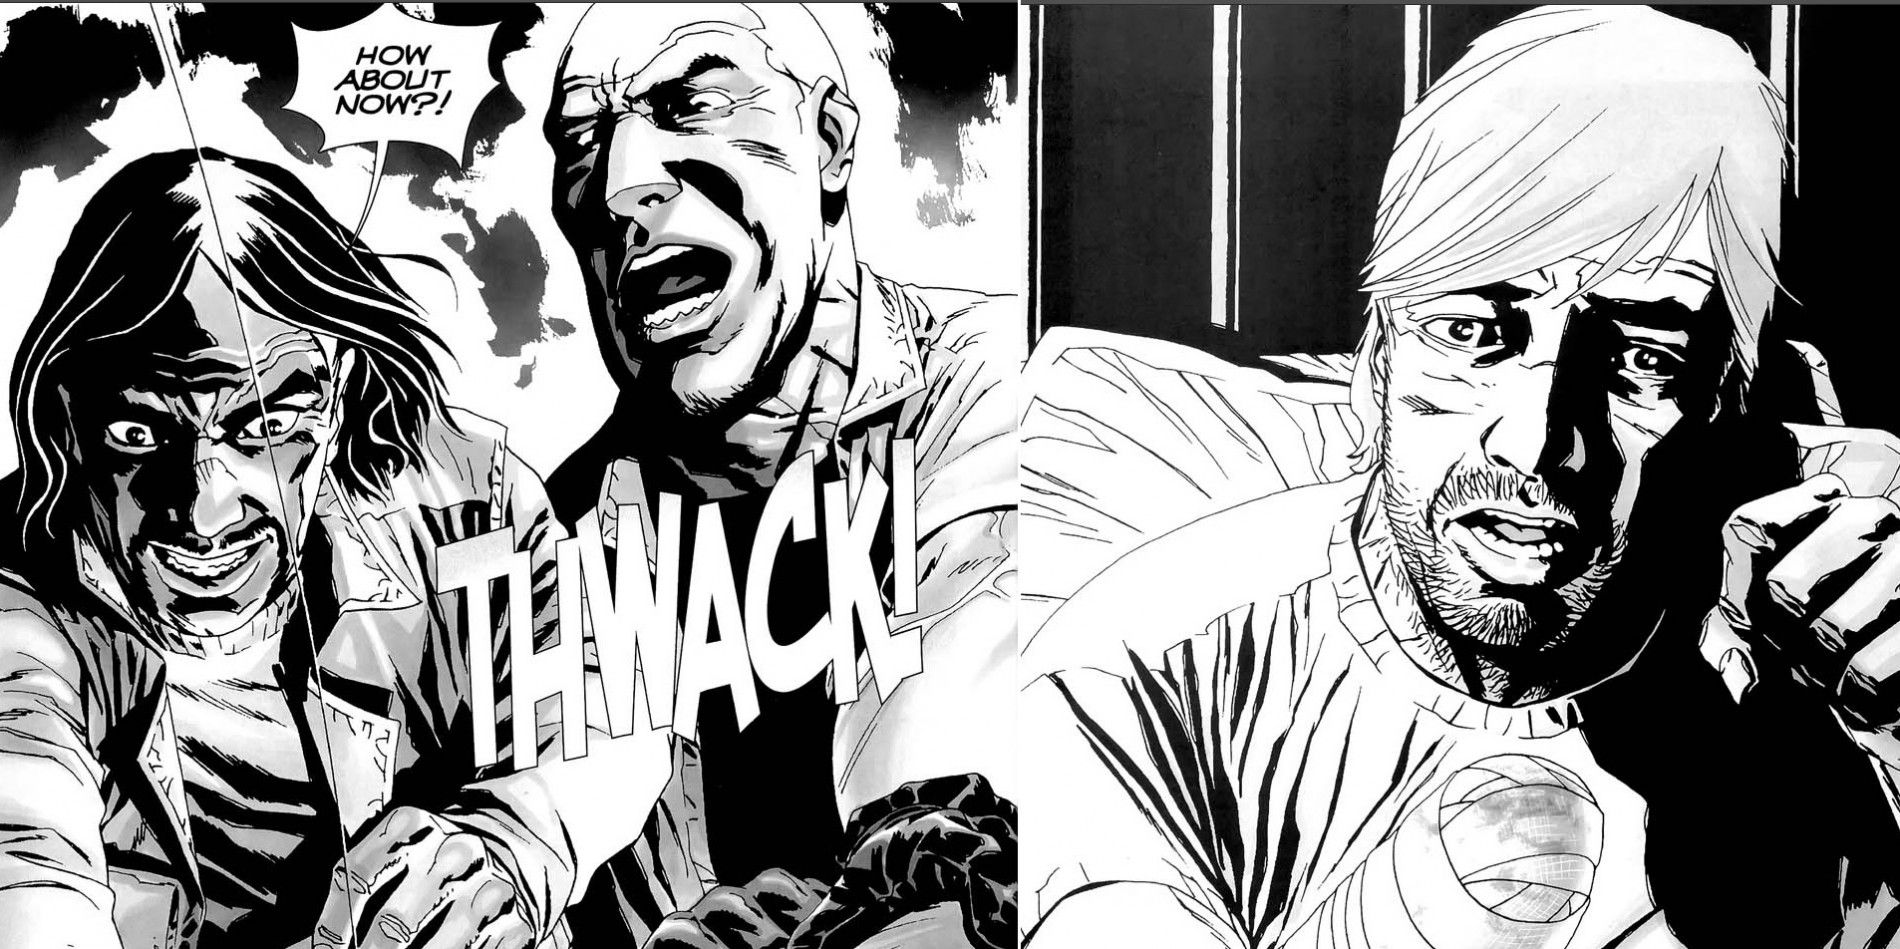 The Governor cuts Rick's hand off in The Walking Dead comic